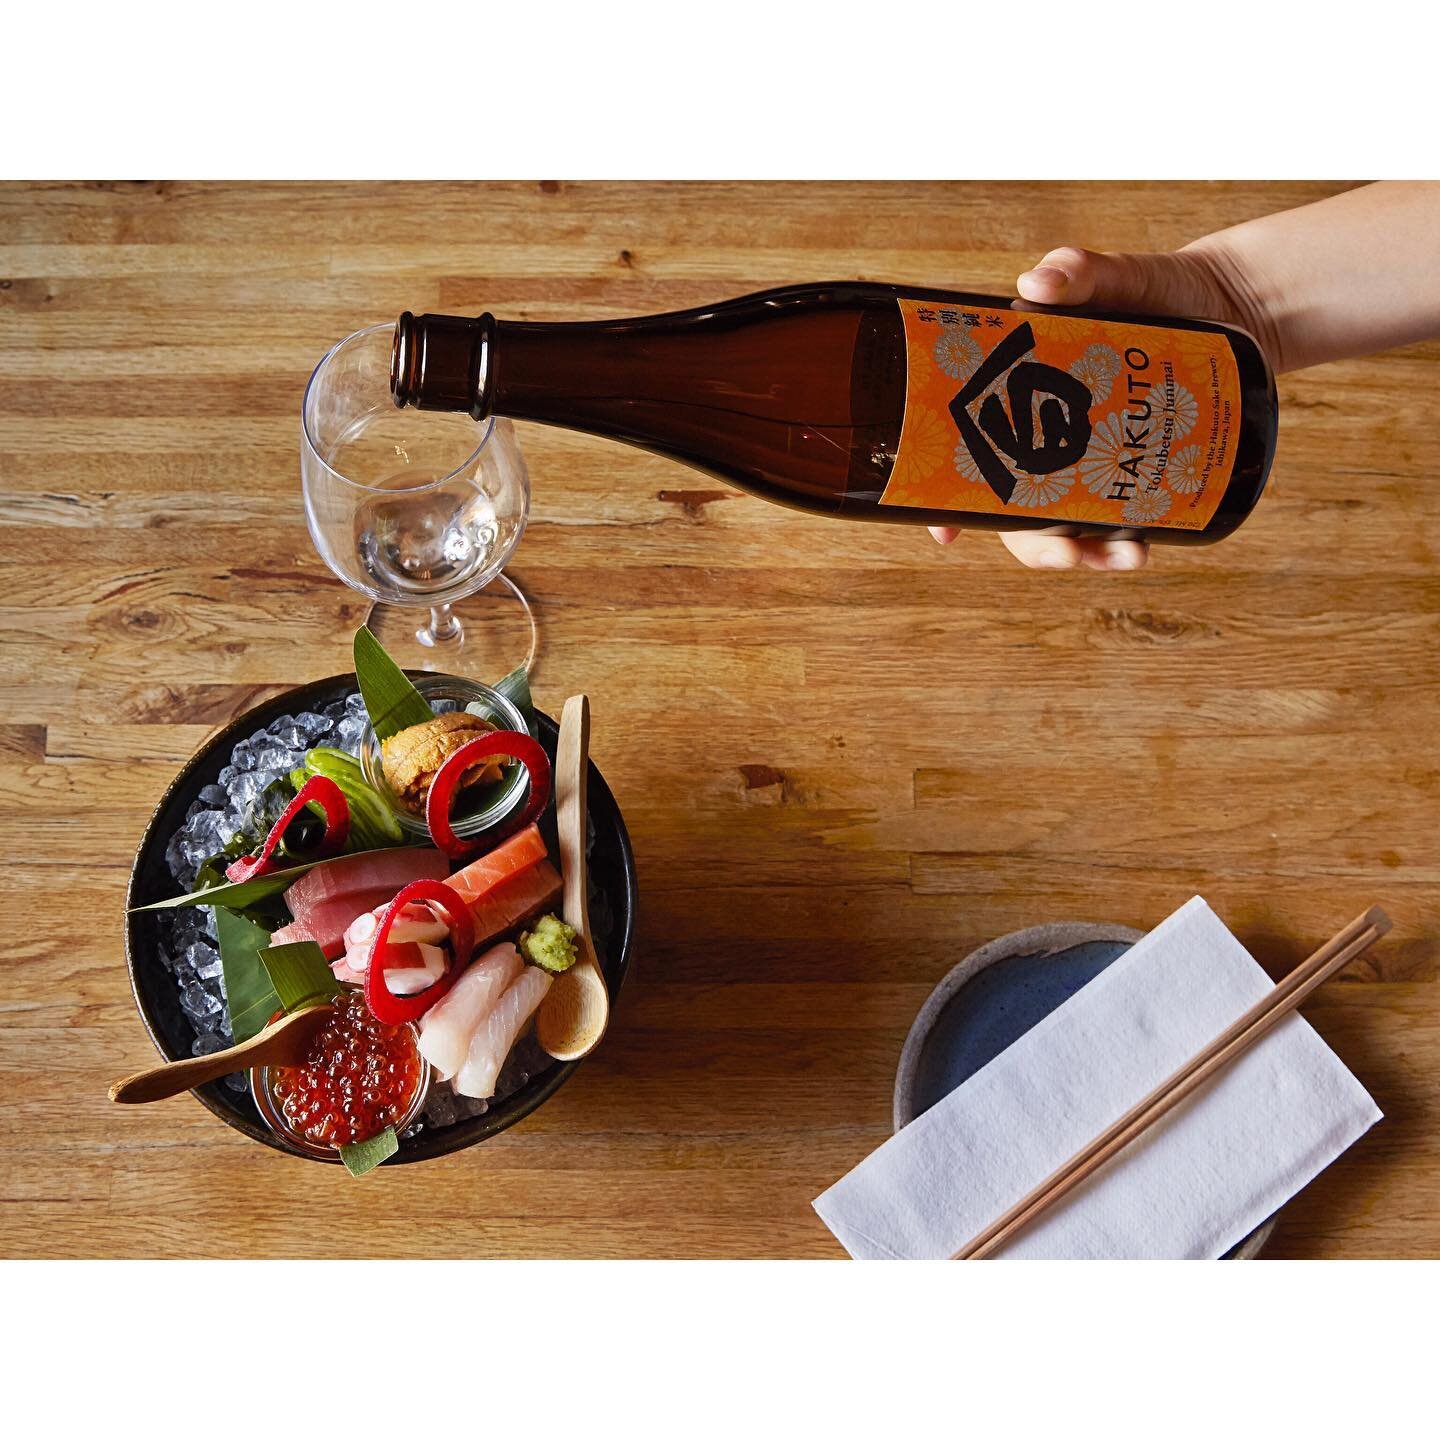 Today&rsquo;s Sashimi, Takumen style
Ask your server for today&rsquo;s selection. Perfectly paired with Hakuto Tokubetsu Junmai, the Sake that our sommelier fell in love with in Japan and looked forward to serving for a long time.
*Available only for